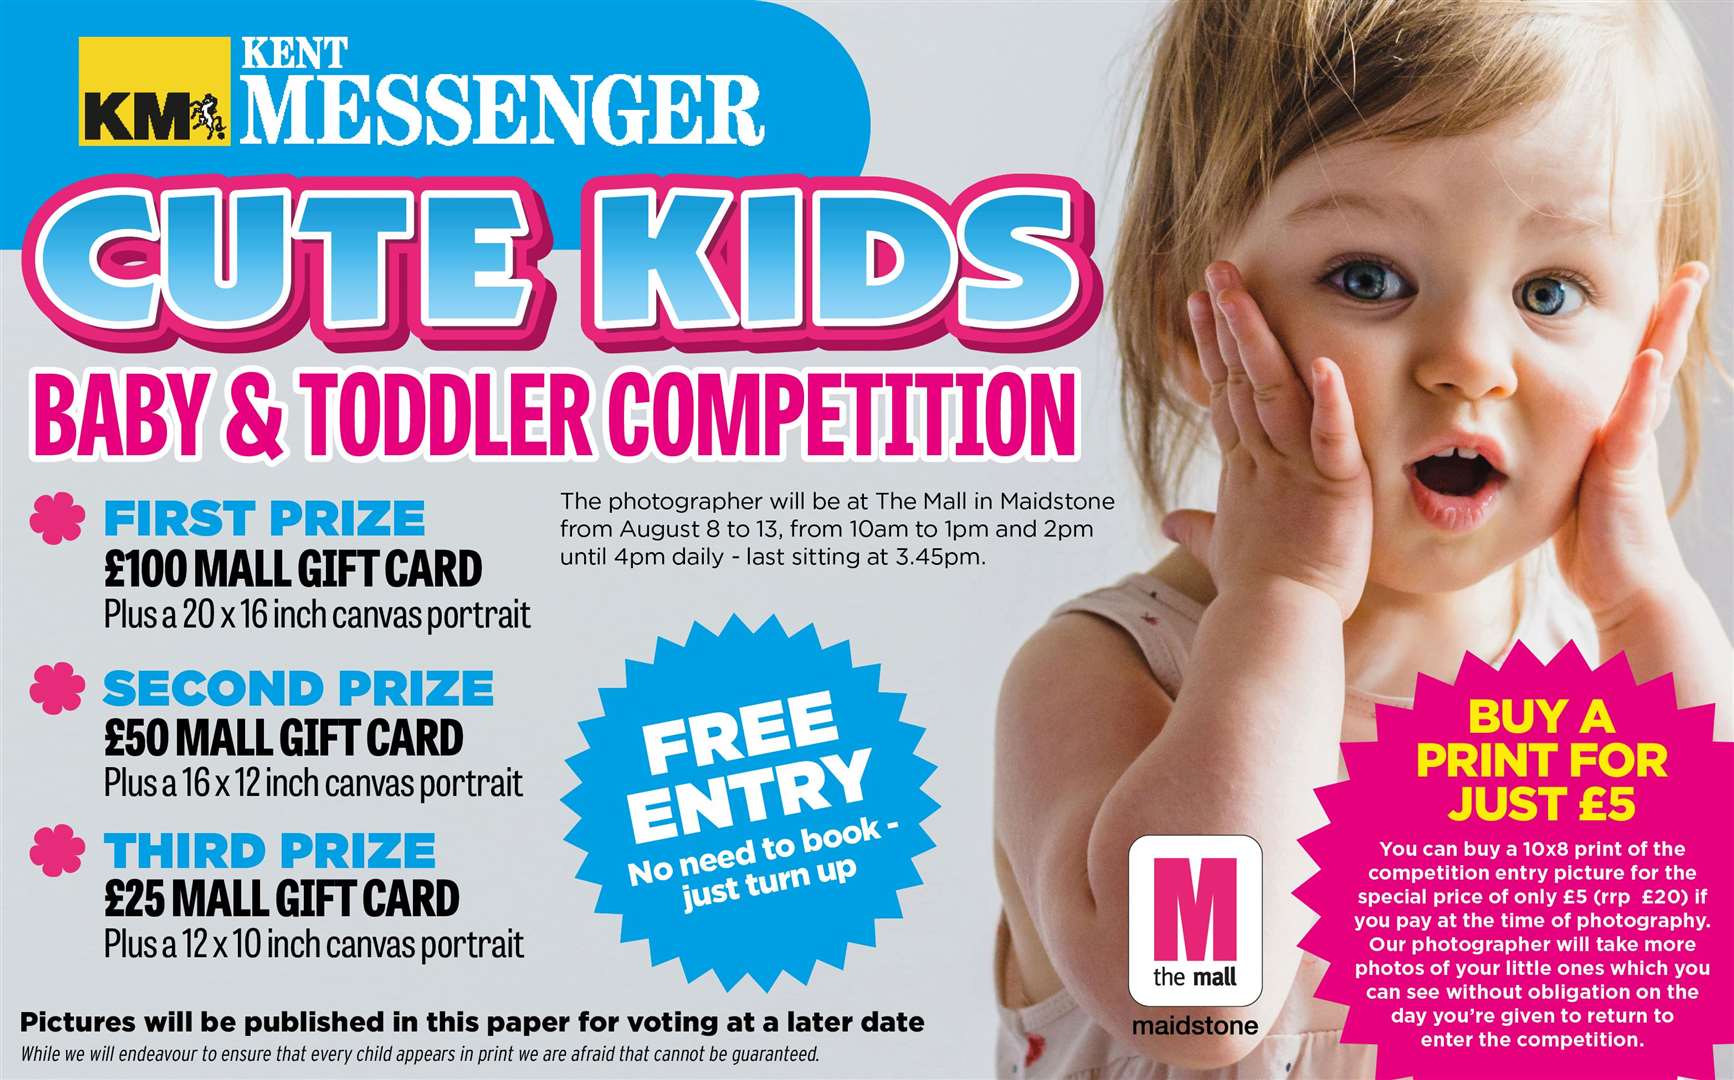 Cute Kids in the Kent Messenger returns to The Mall shopping centre in August